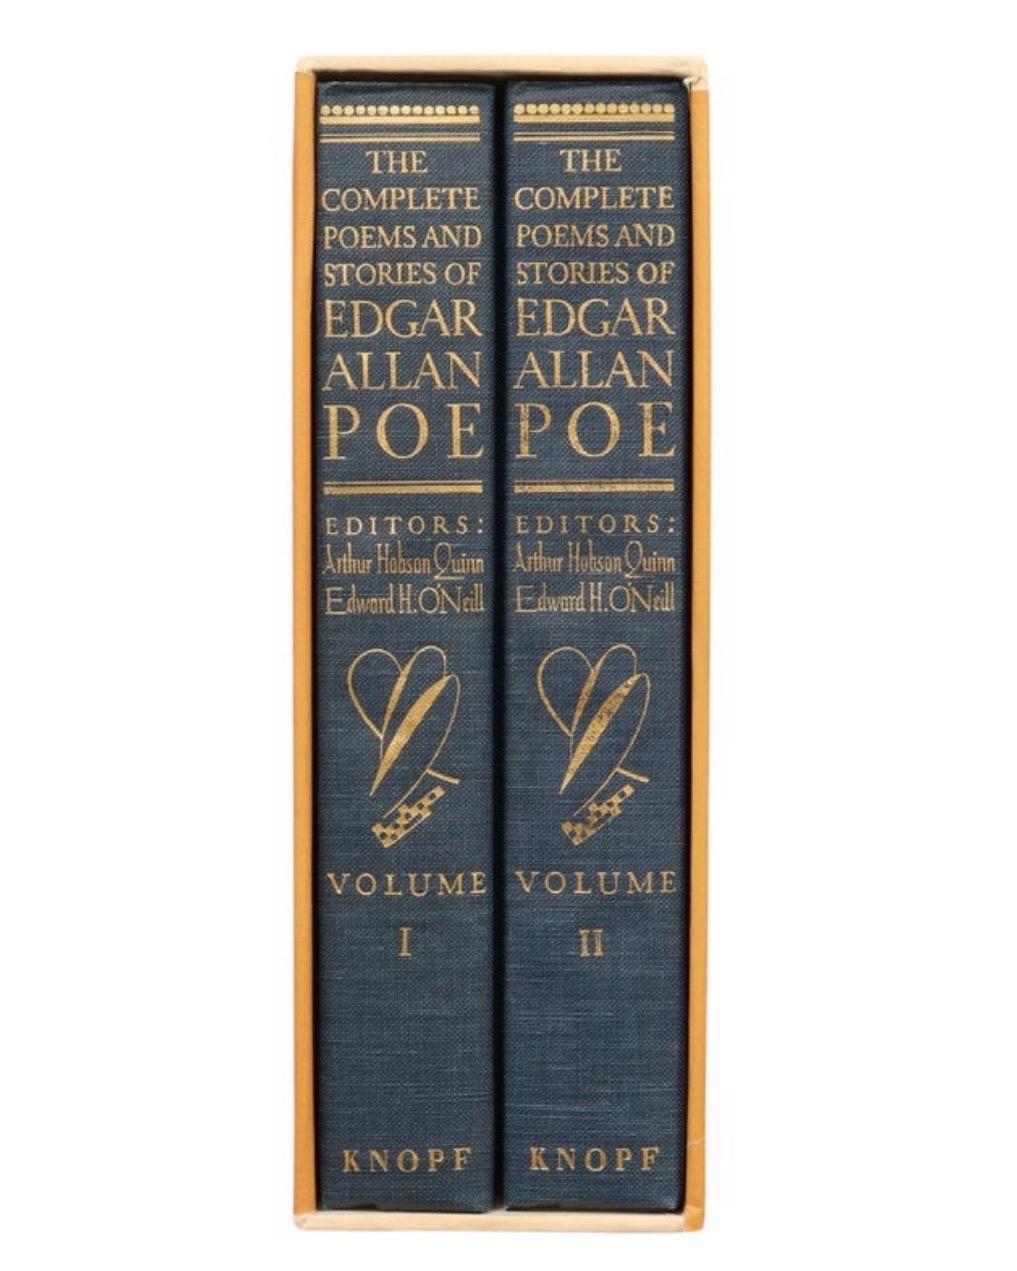 The Borzoi Poe, two volume boxed set. The complete poems and stories of Edgar Allan Poe. Published in 1982 by Alfred A. Knopf of New York.